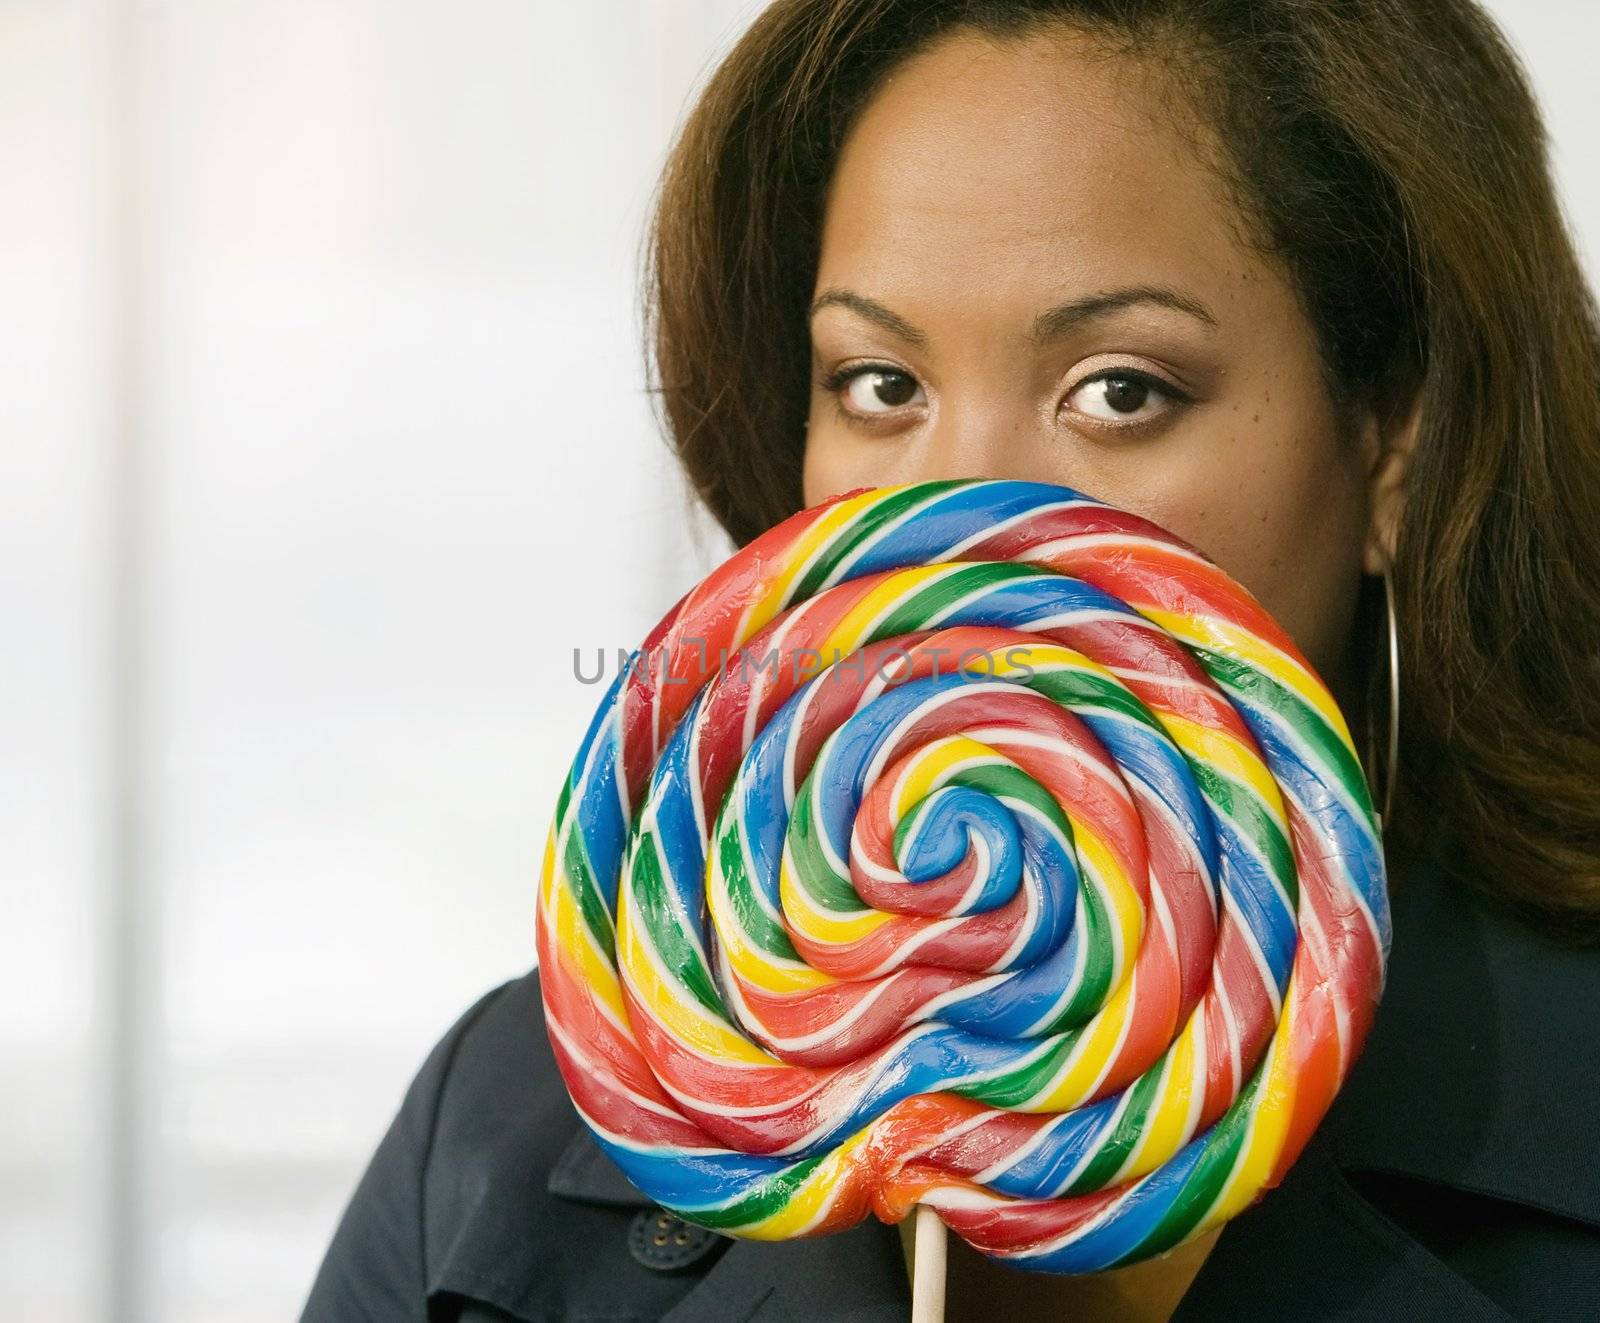 African-American woman stares from behind a colorful lollipop